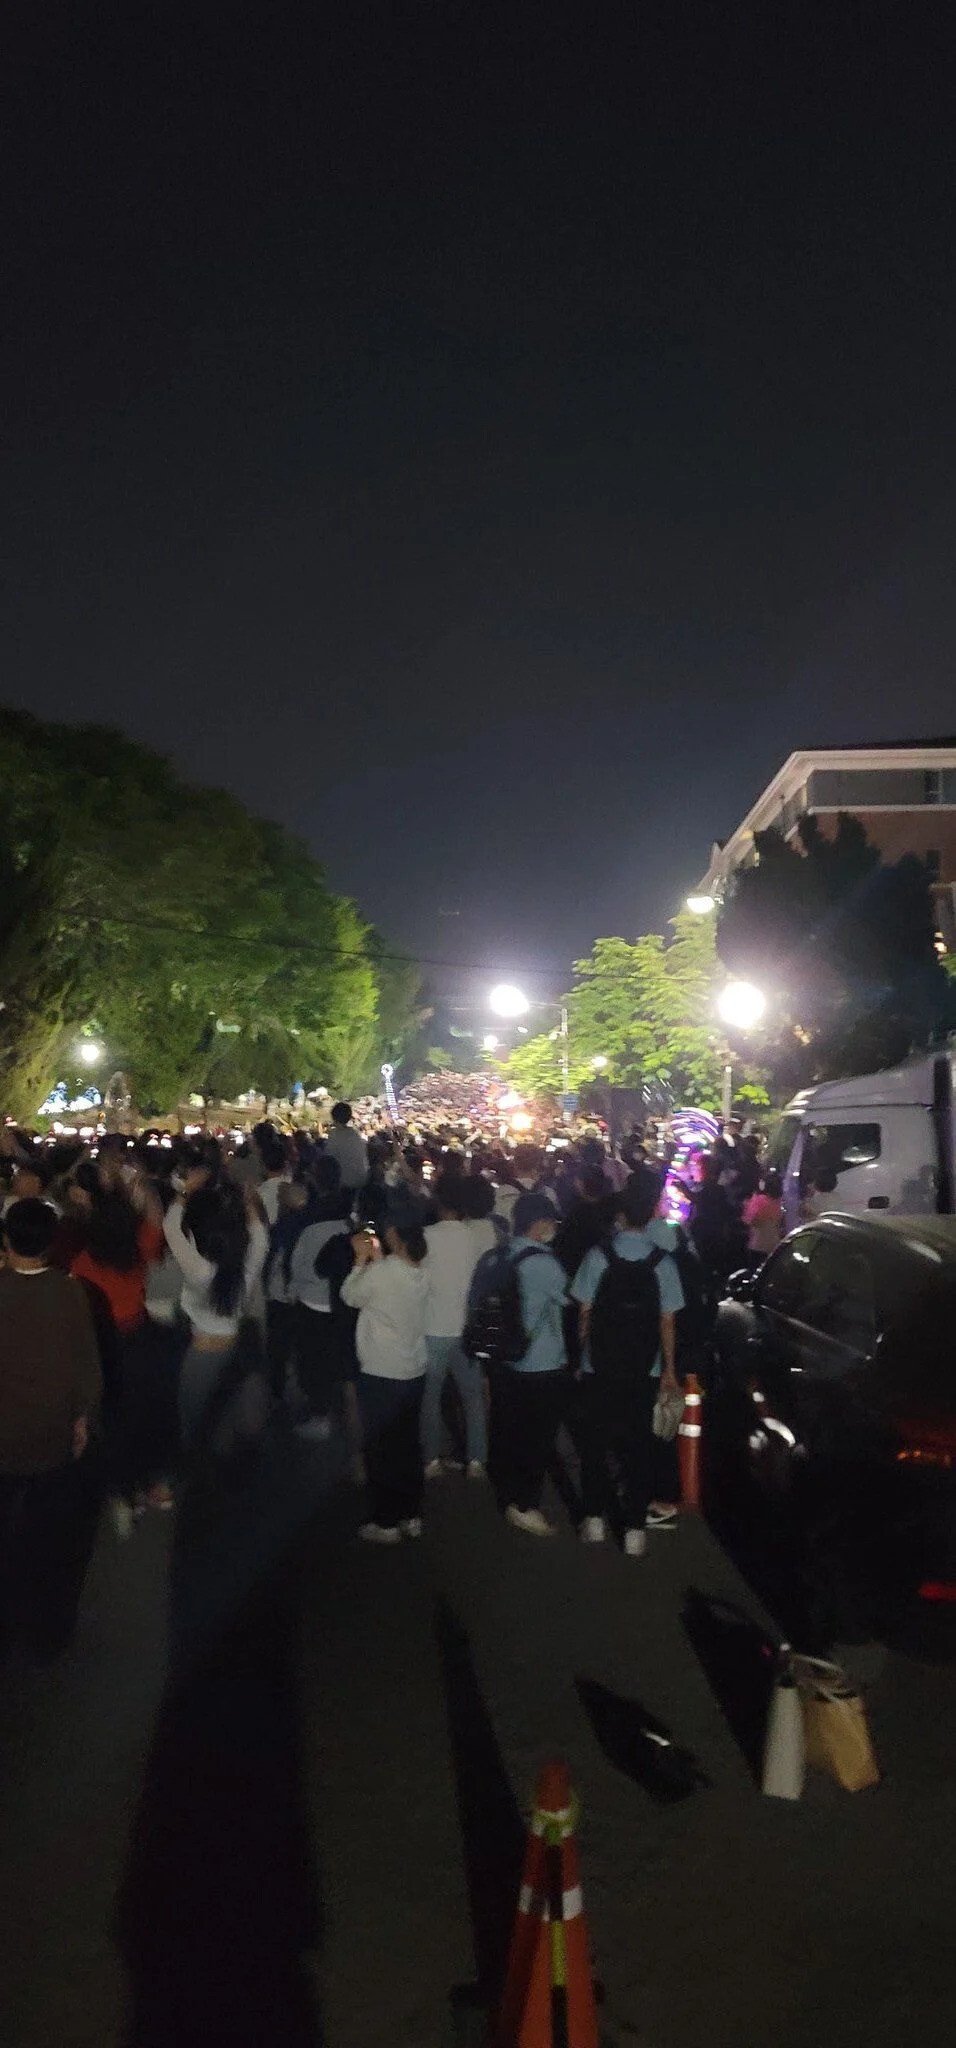 A post about Keimyung University festival that was crowded yesterday